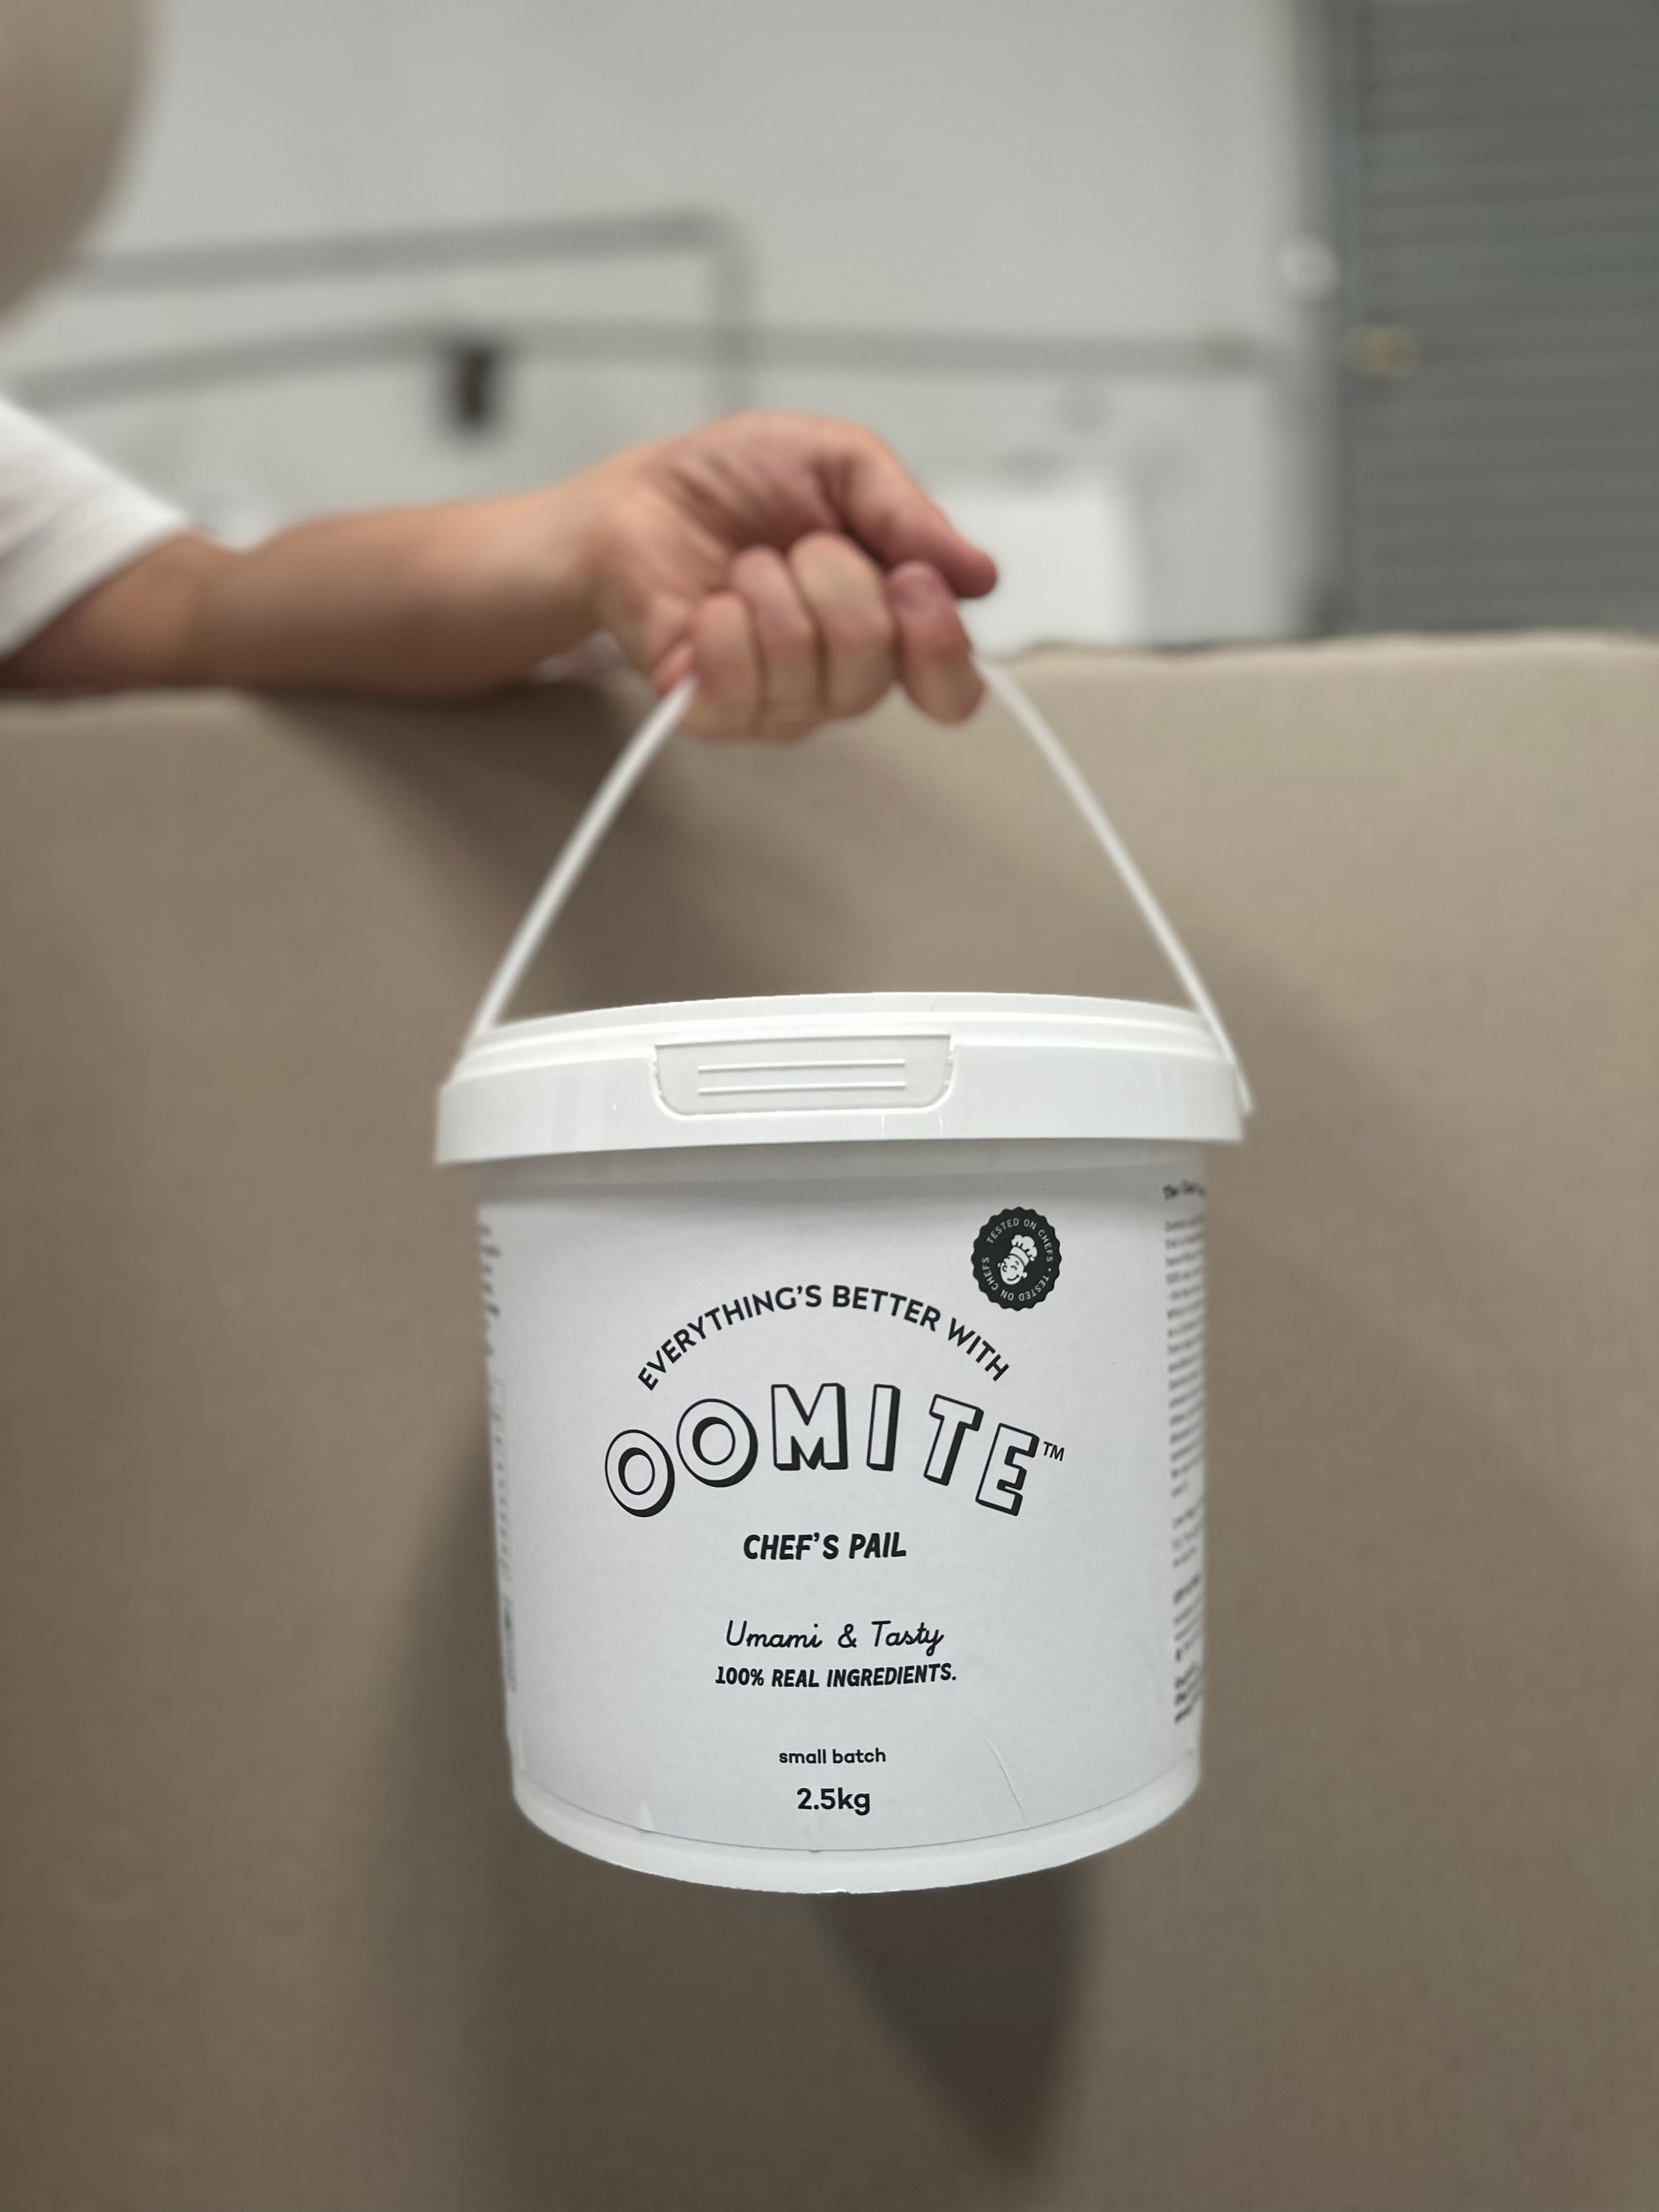 Oomite Chef's Pail BULK 2.5kg (free shipping)